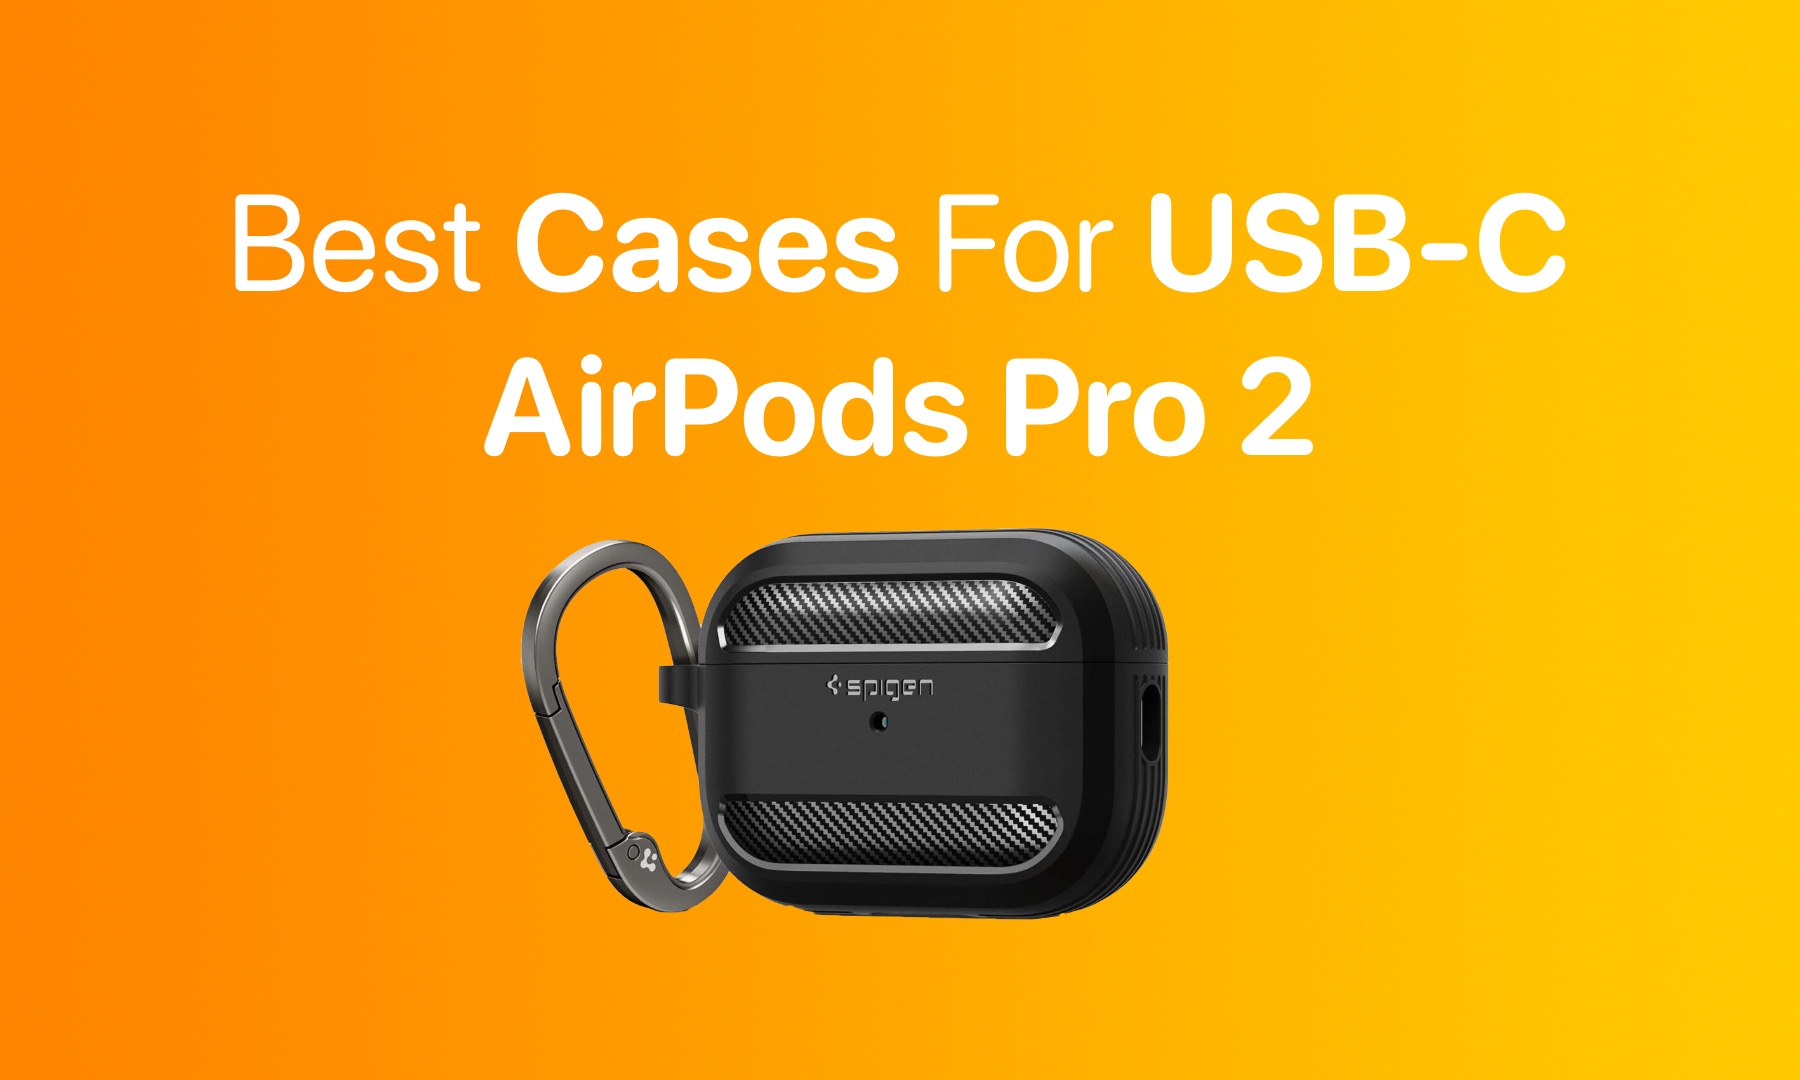 AirPods Pro 2 Clear Case [7 Colors] – elago